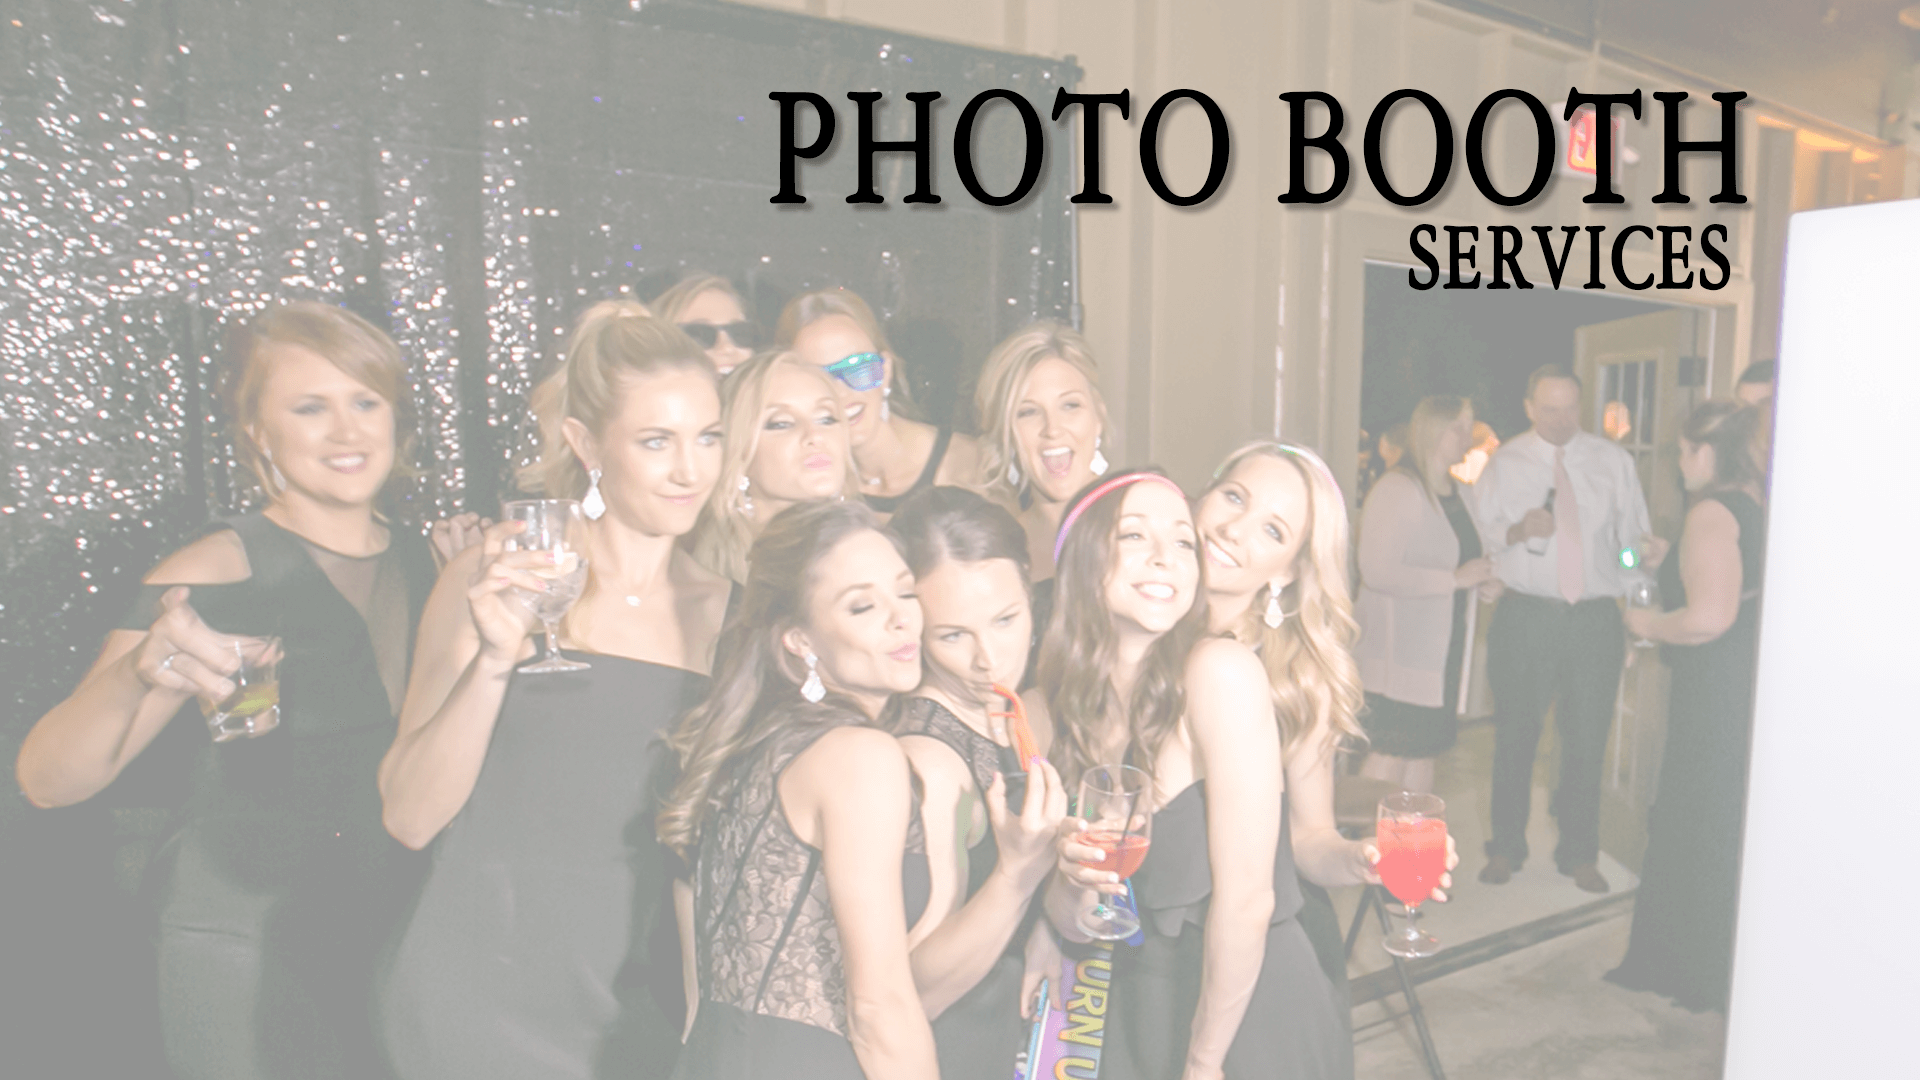 Mike Jones Entertainment and Events | Photo Booth Services